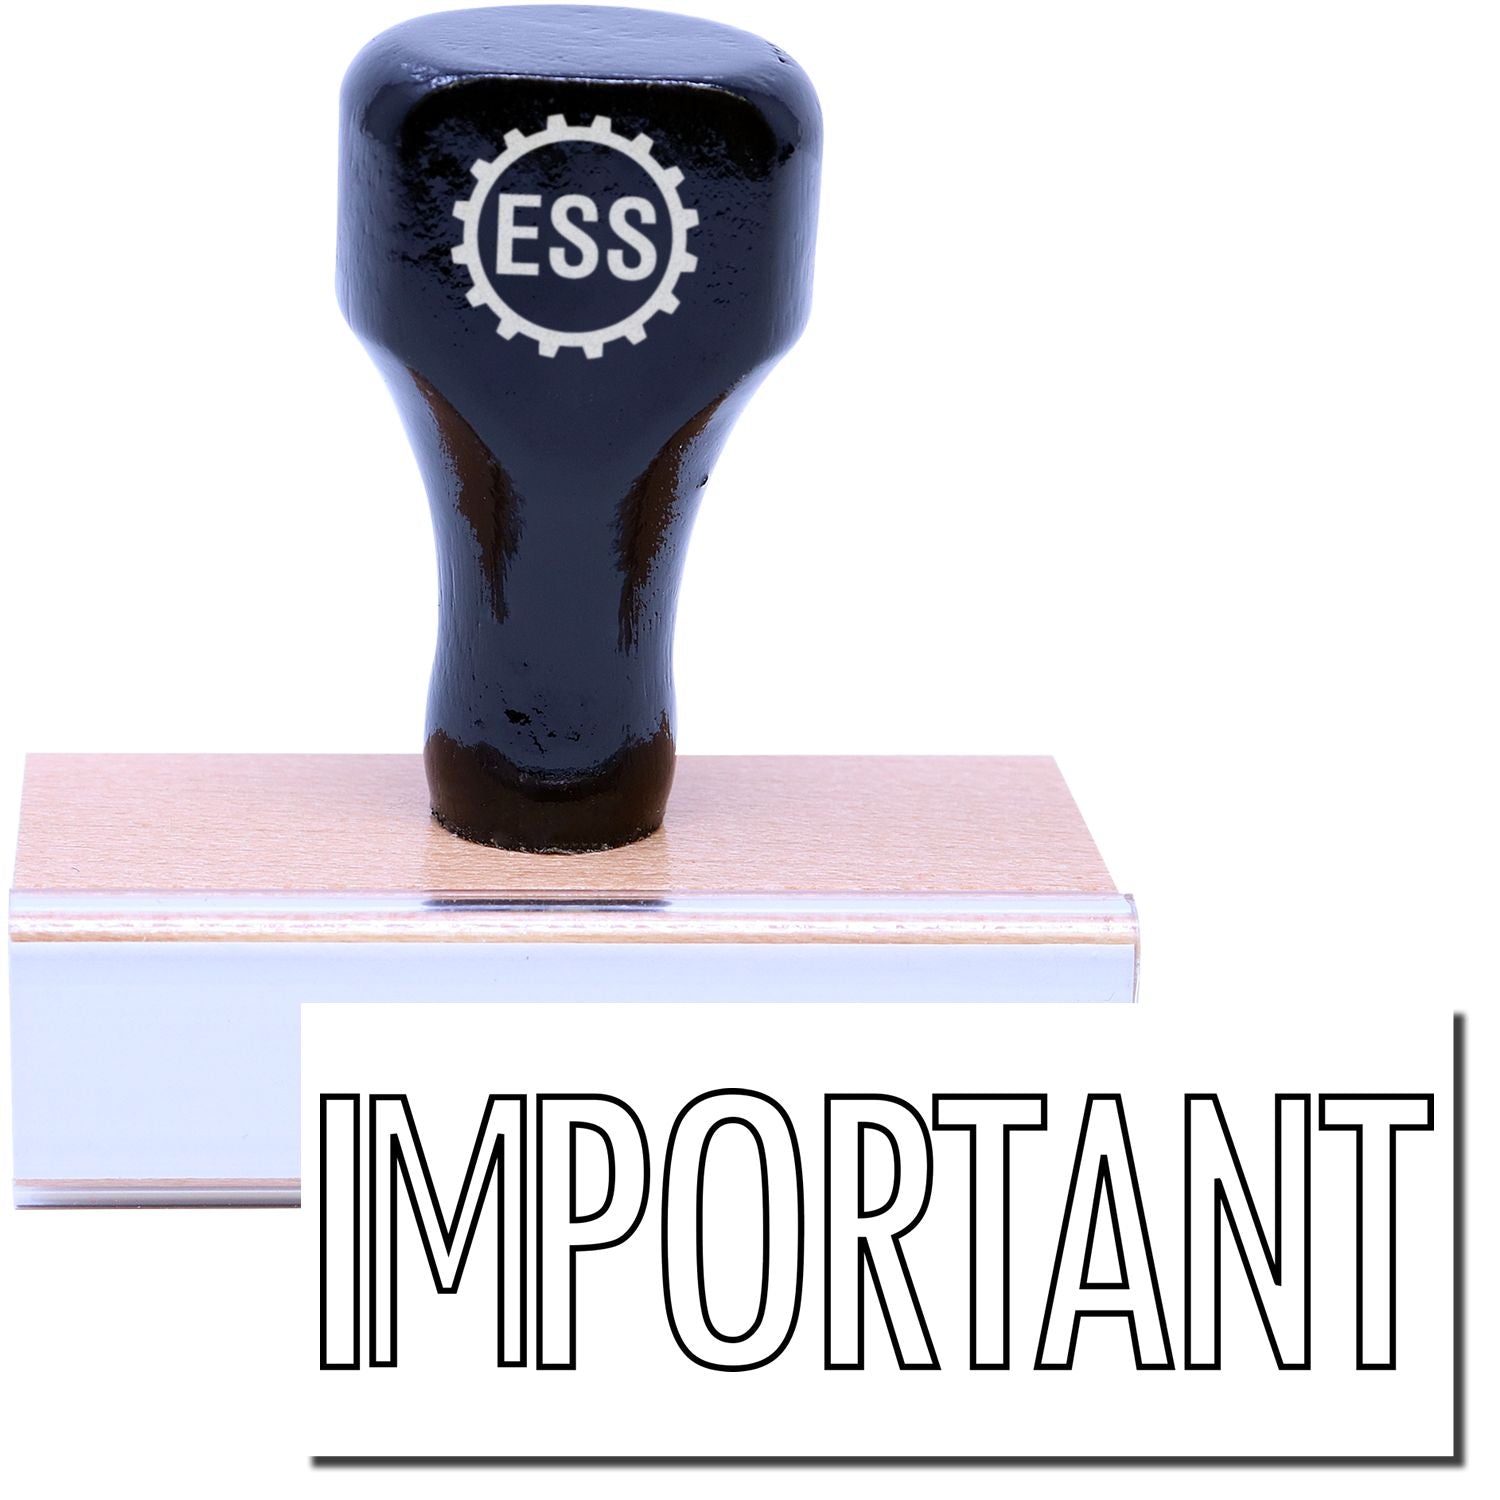 A stock office rubber stamp with a stamped image showing how the text "IMPORTANT" in an outline font is displayed after stamping.